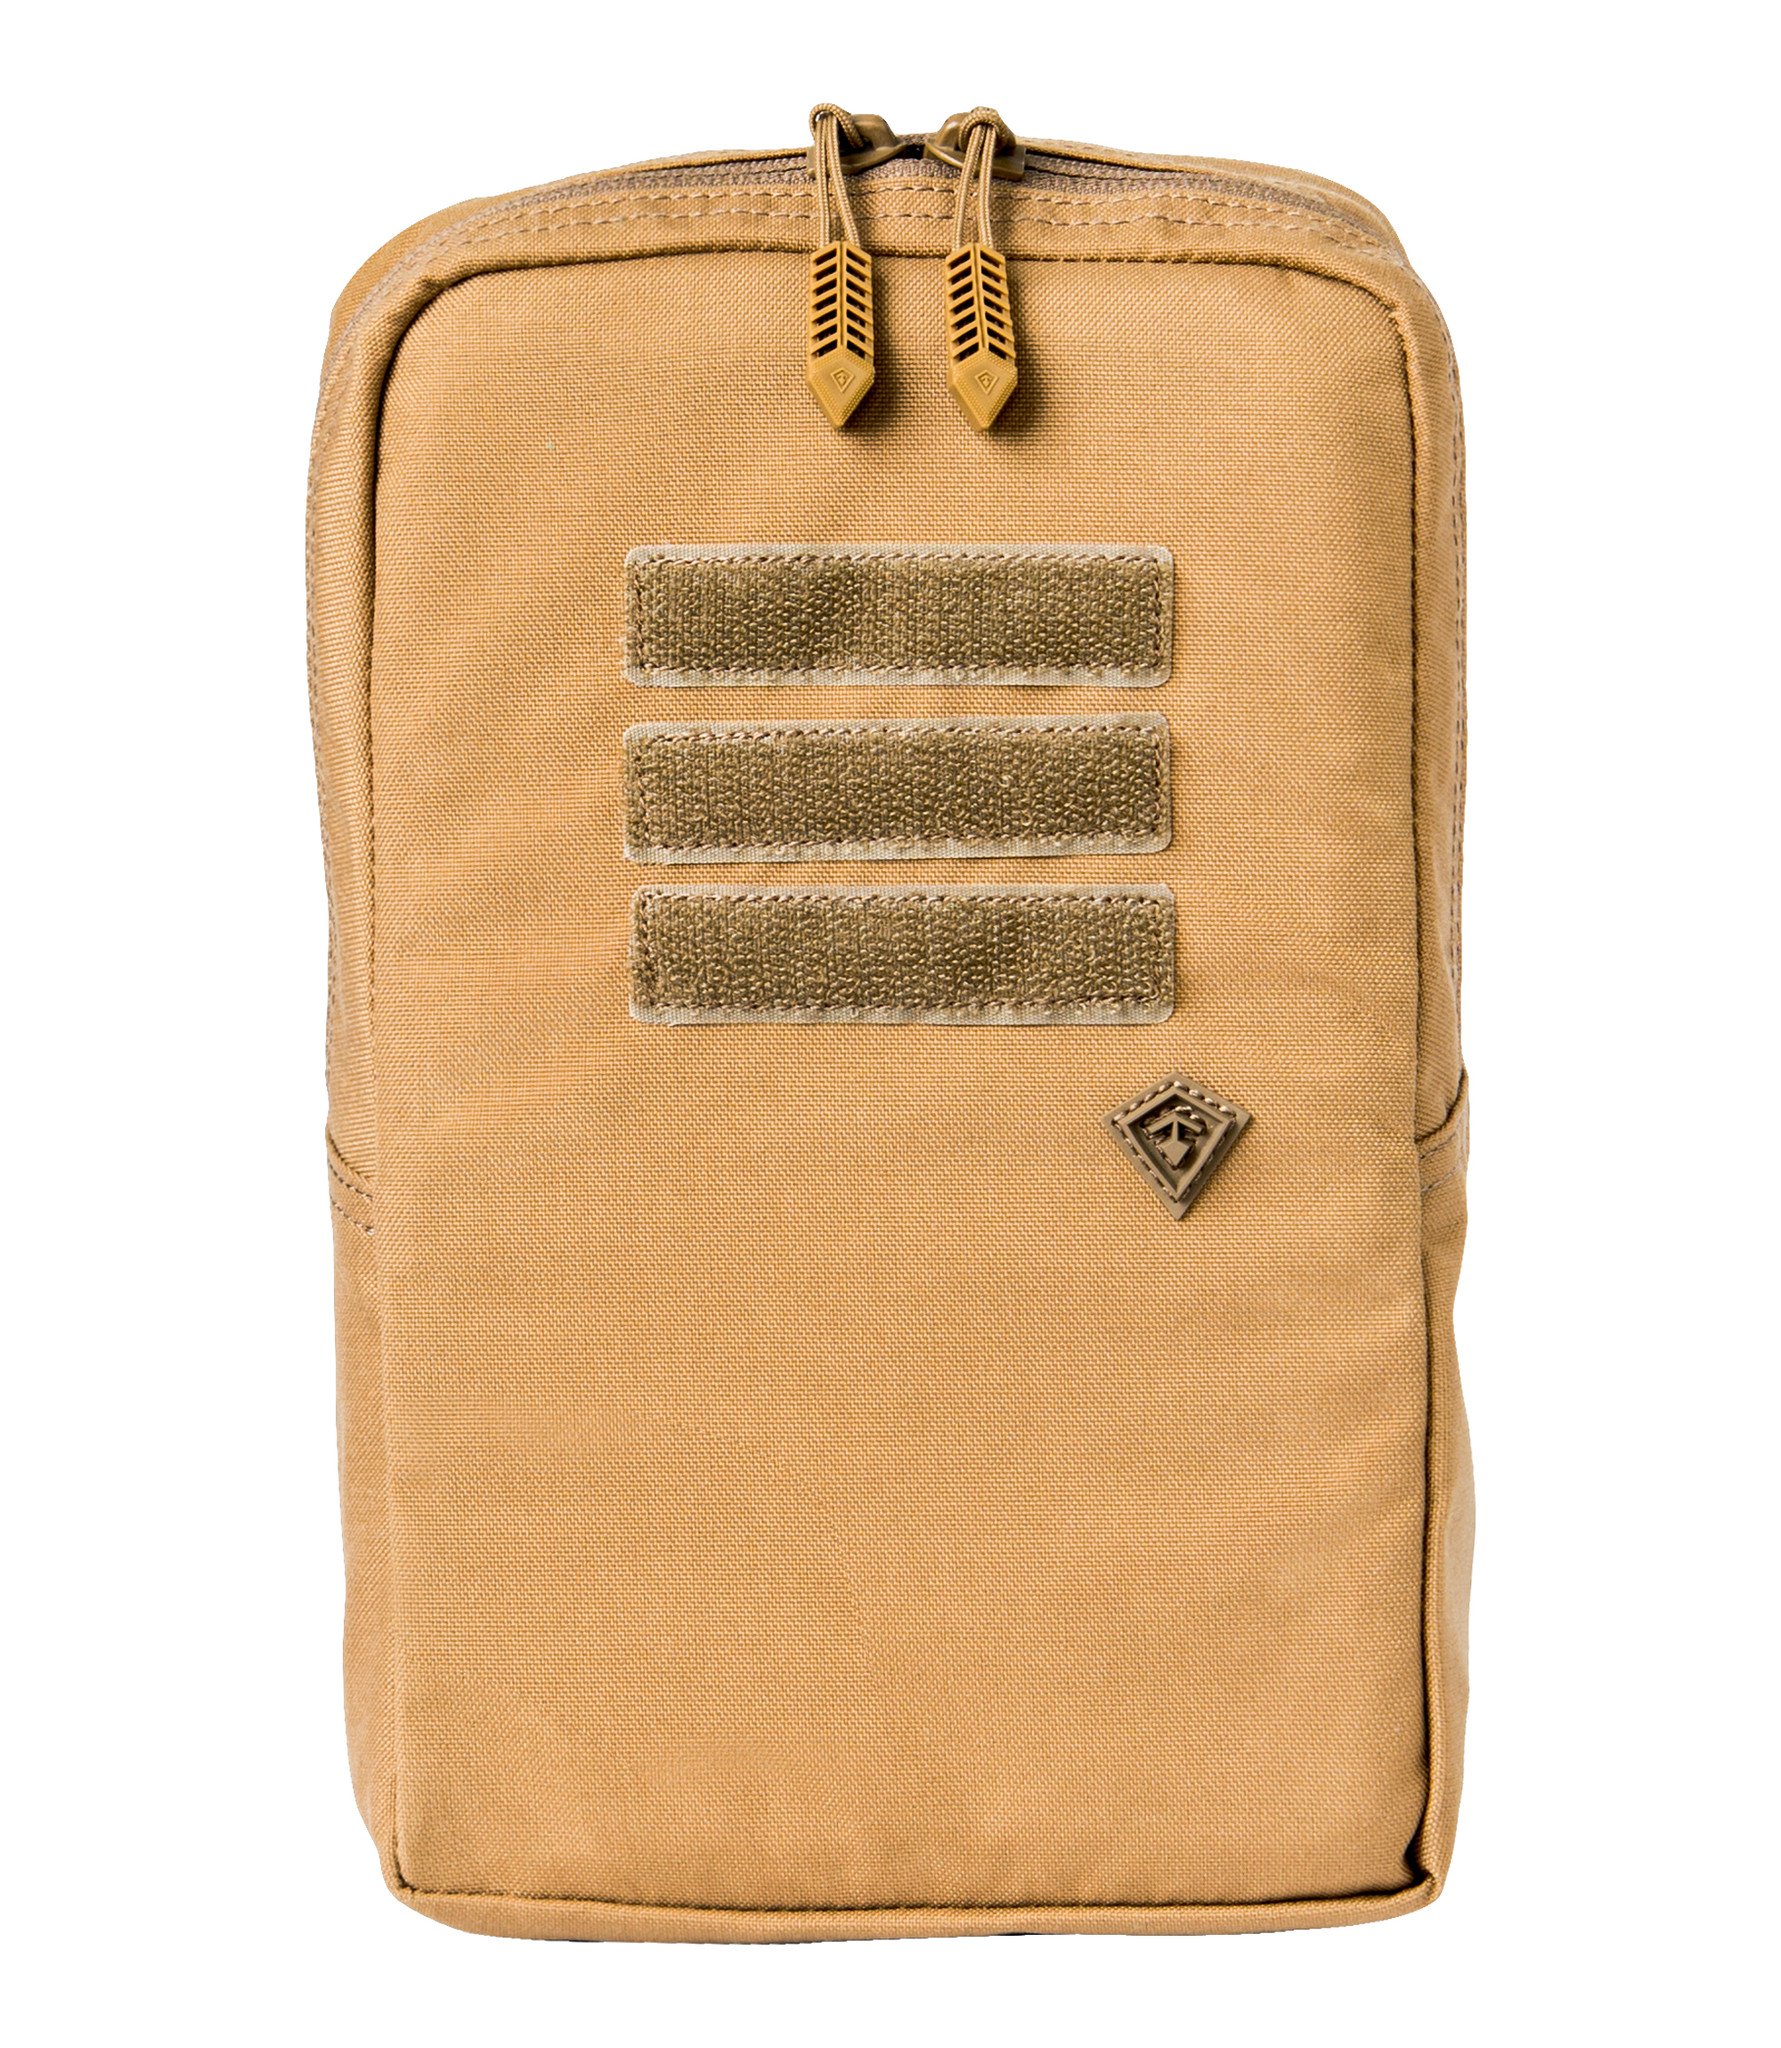 First Tactical Tactix 6X10 Utility Pouch